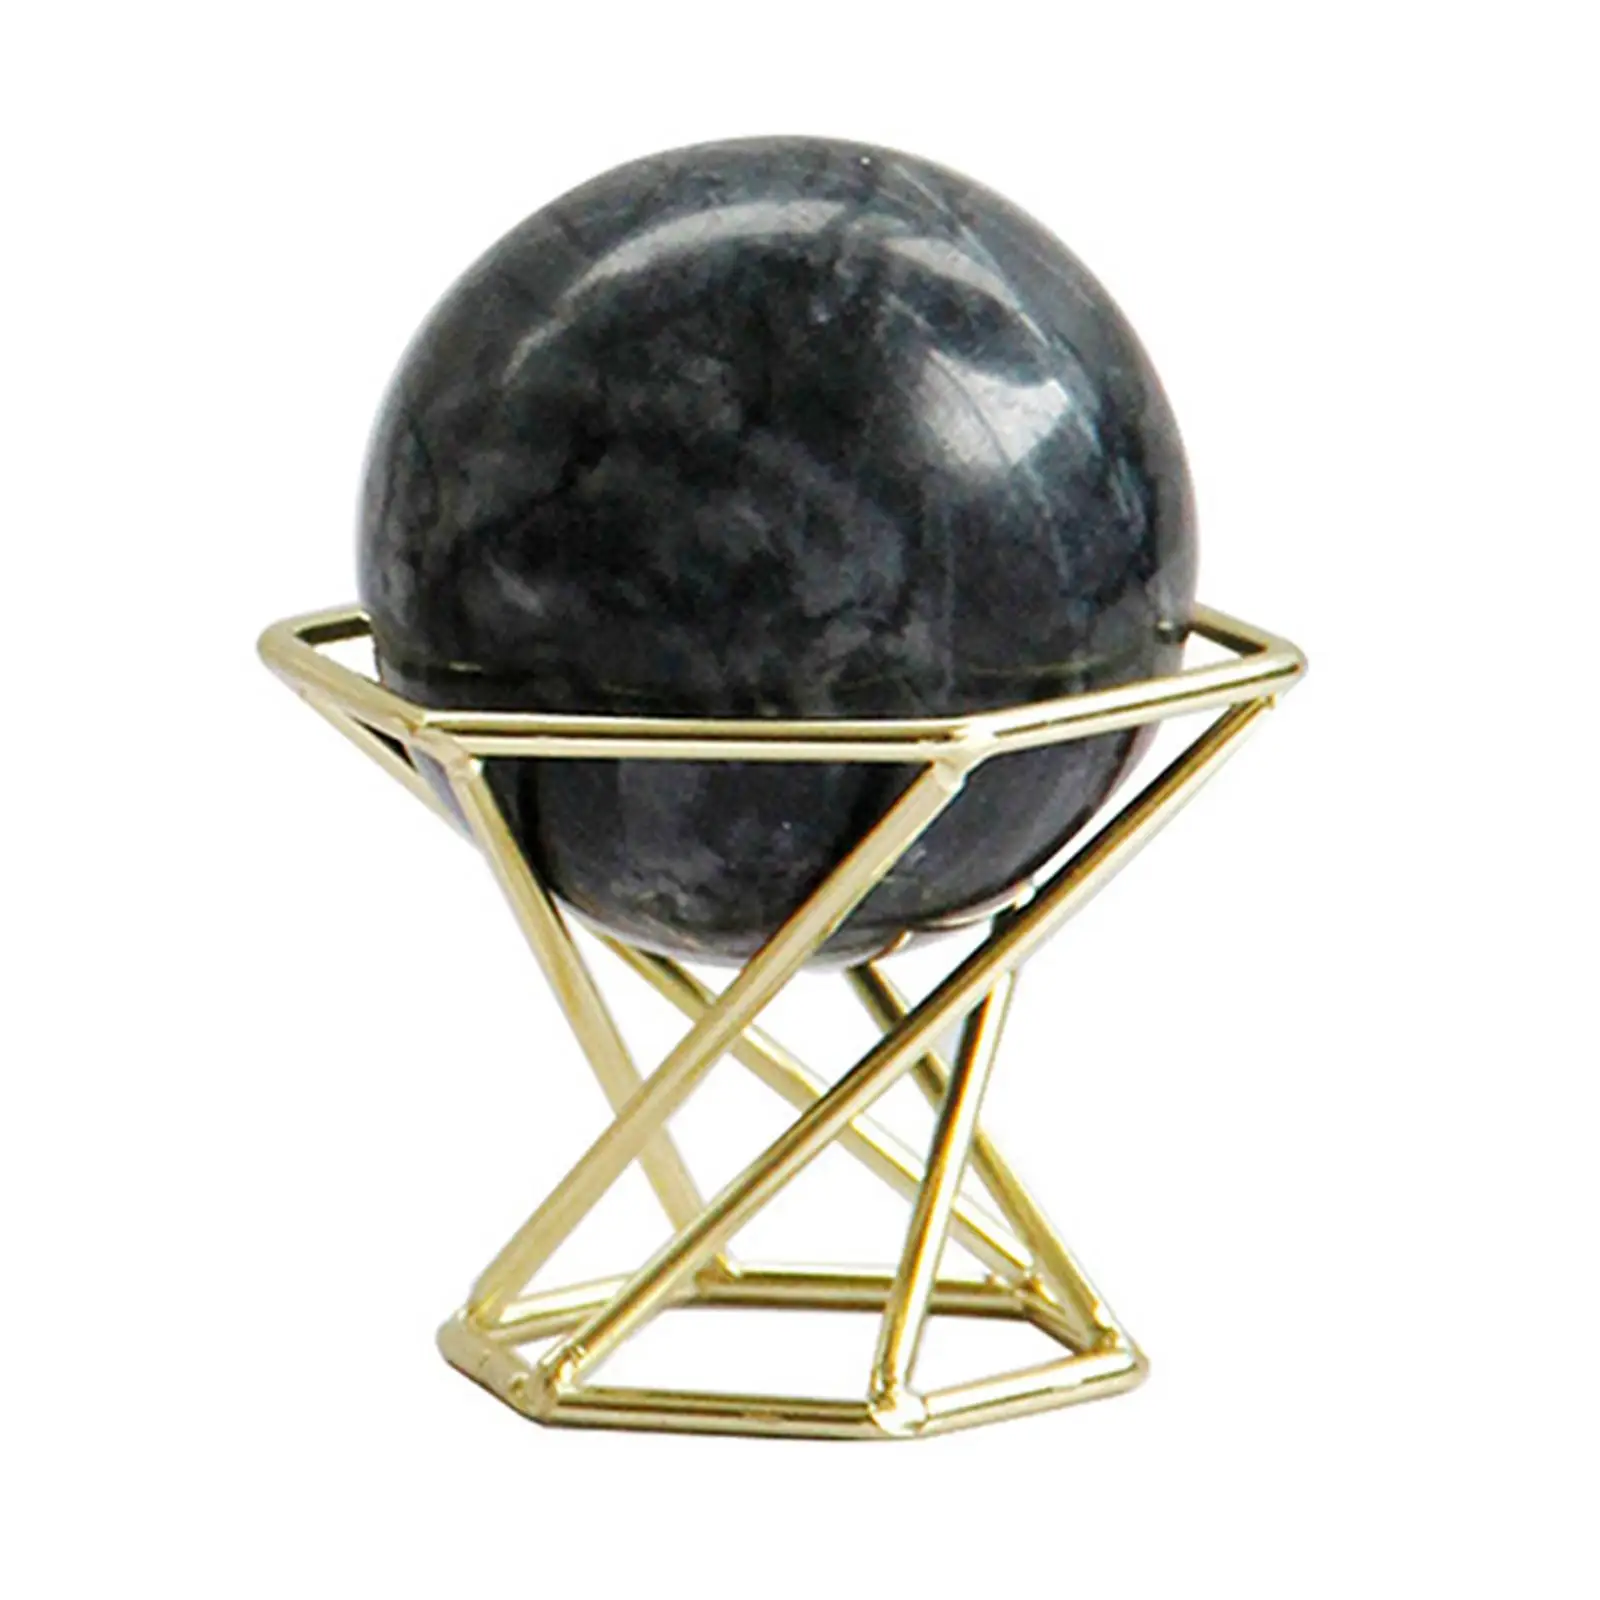 50mm Black Marble Ball with Metal Stand Stone for Decoration